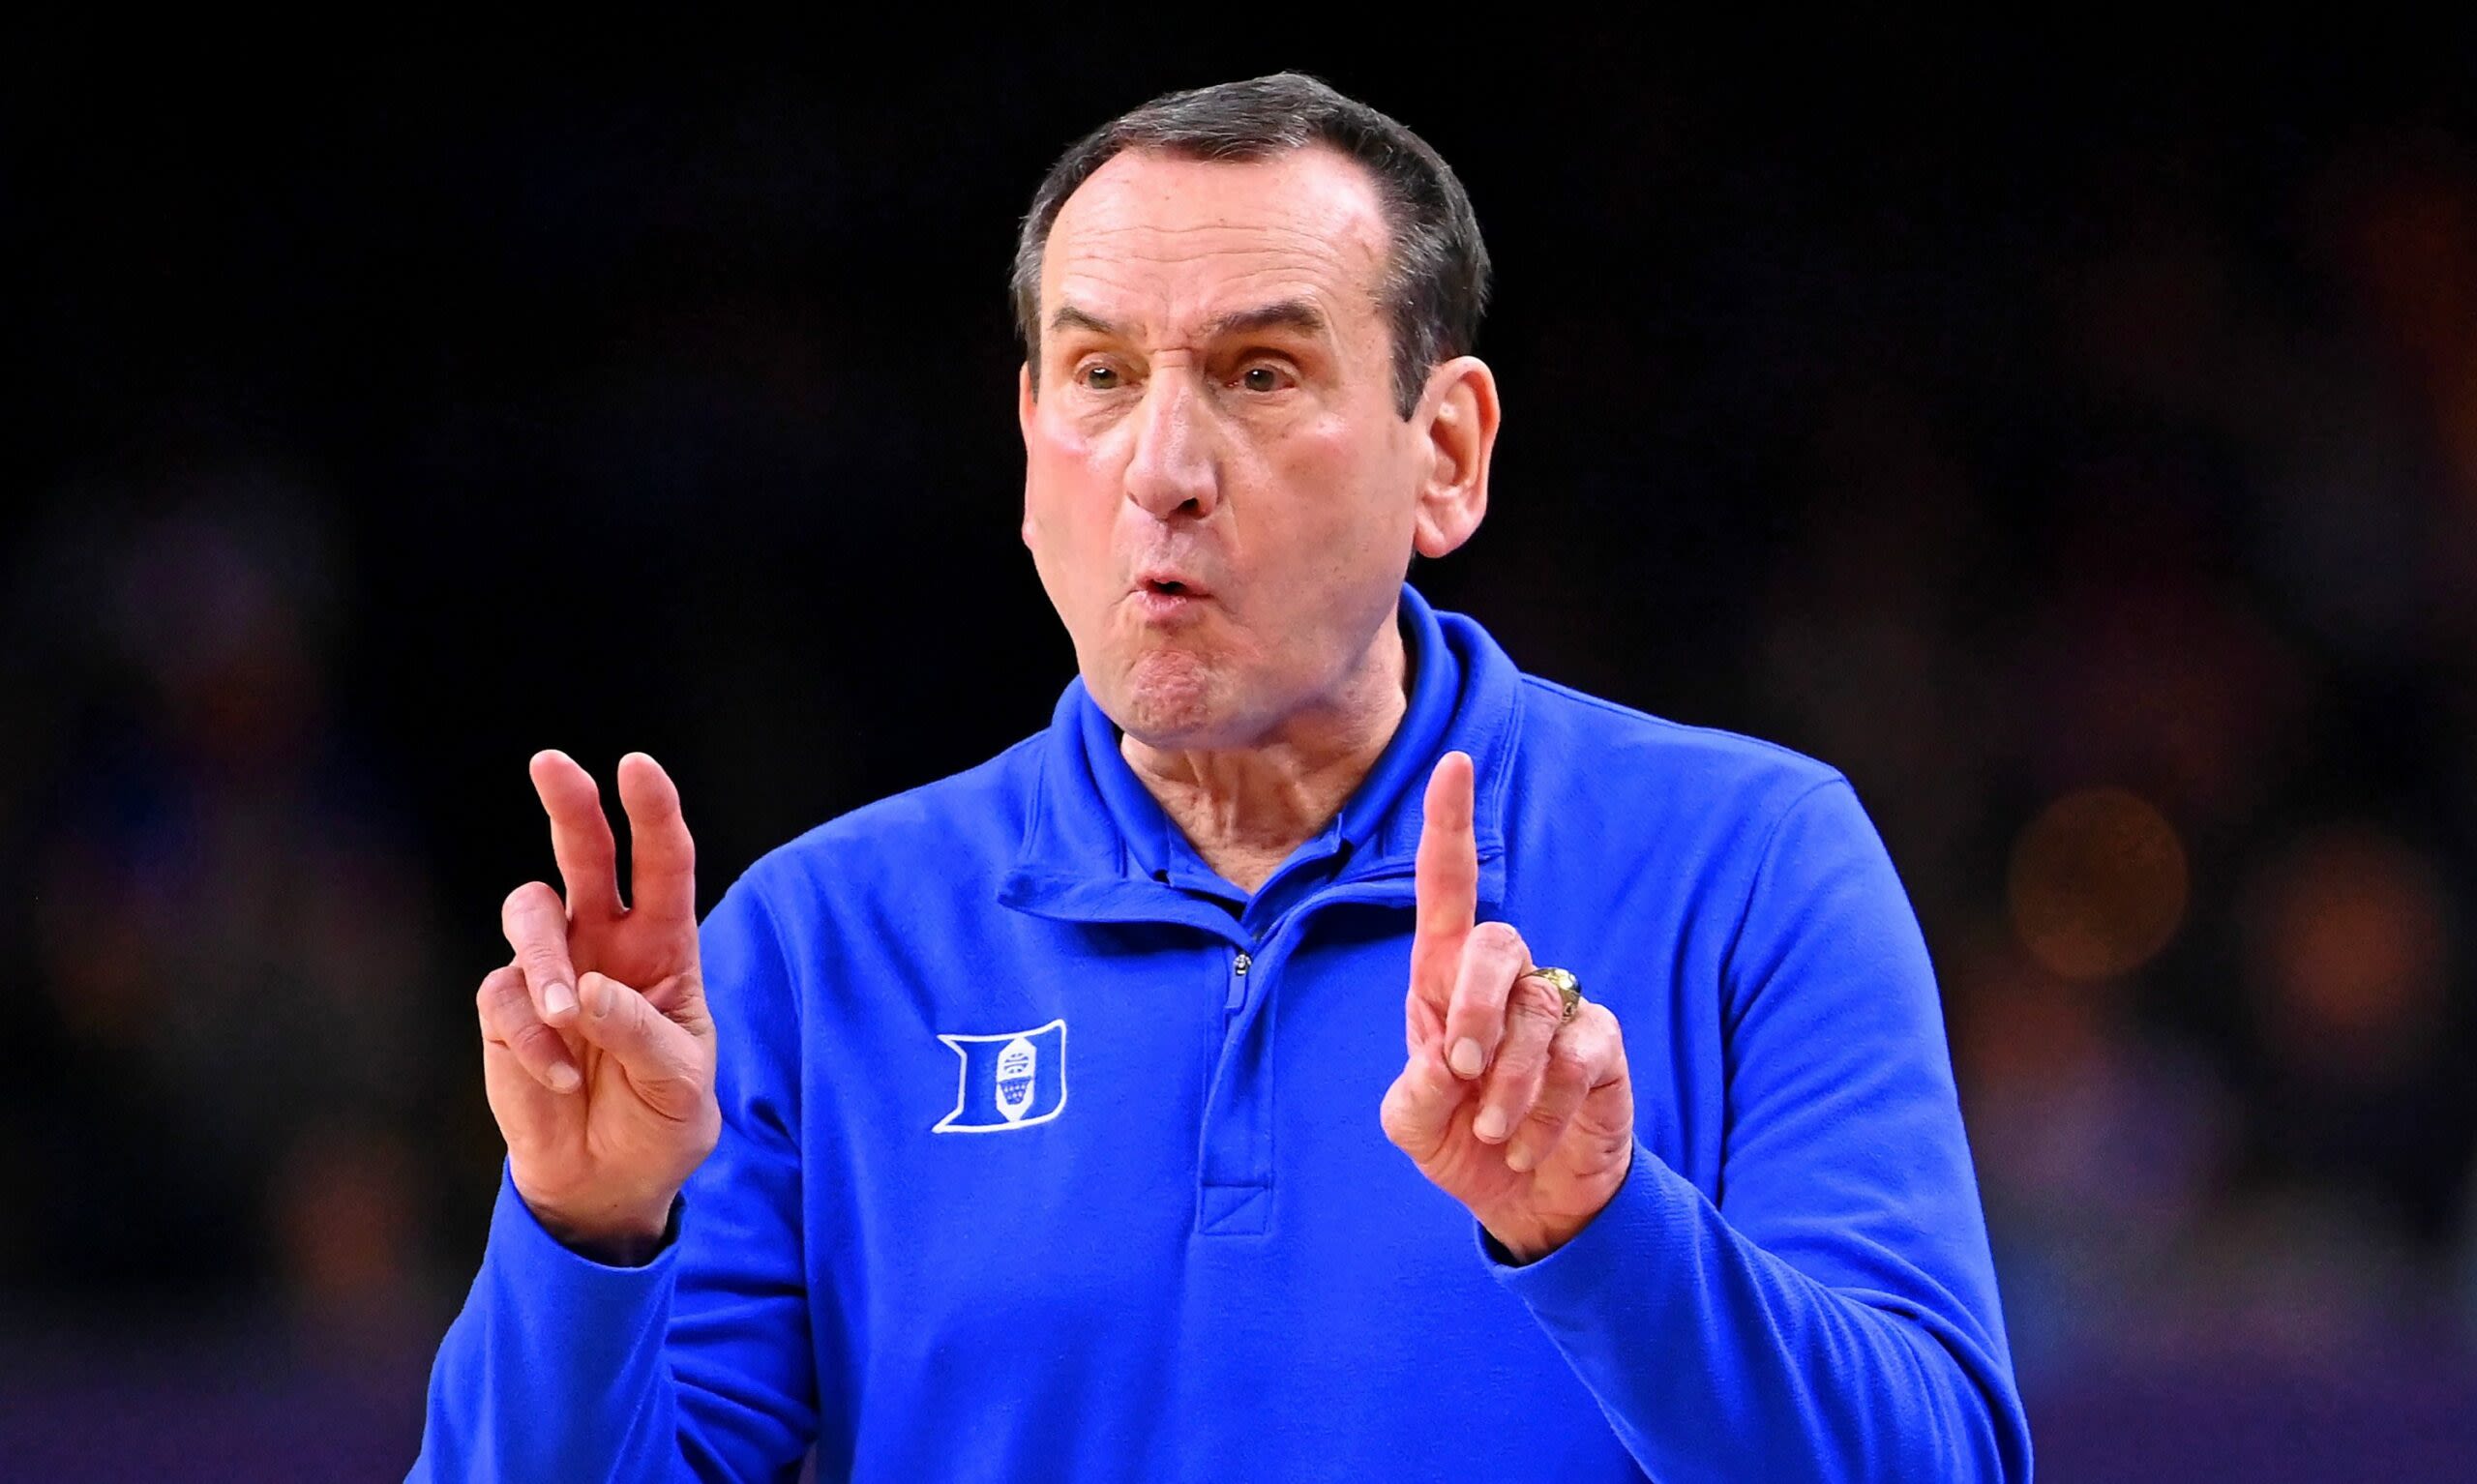 Report: Lakers have been using Mike Krzyzewski as a respected unofficial resource during head coaching search